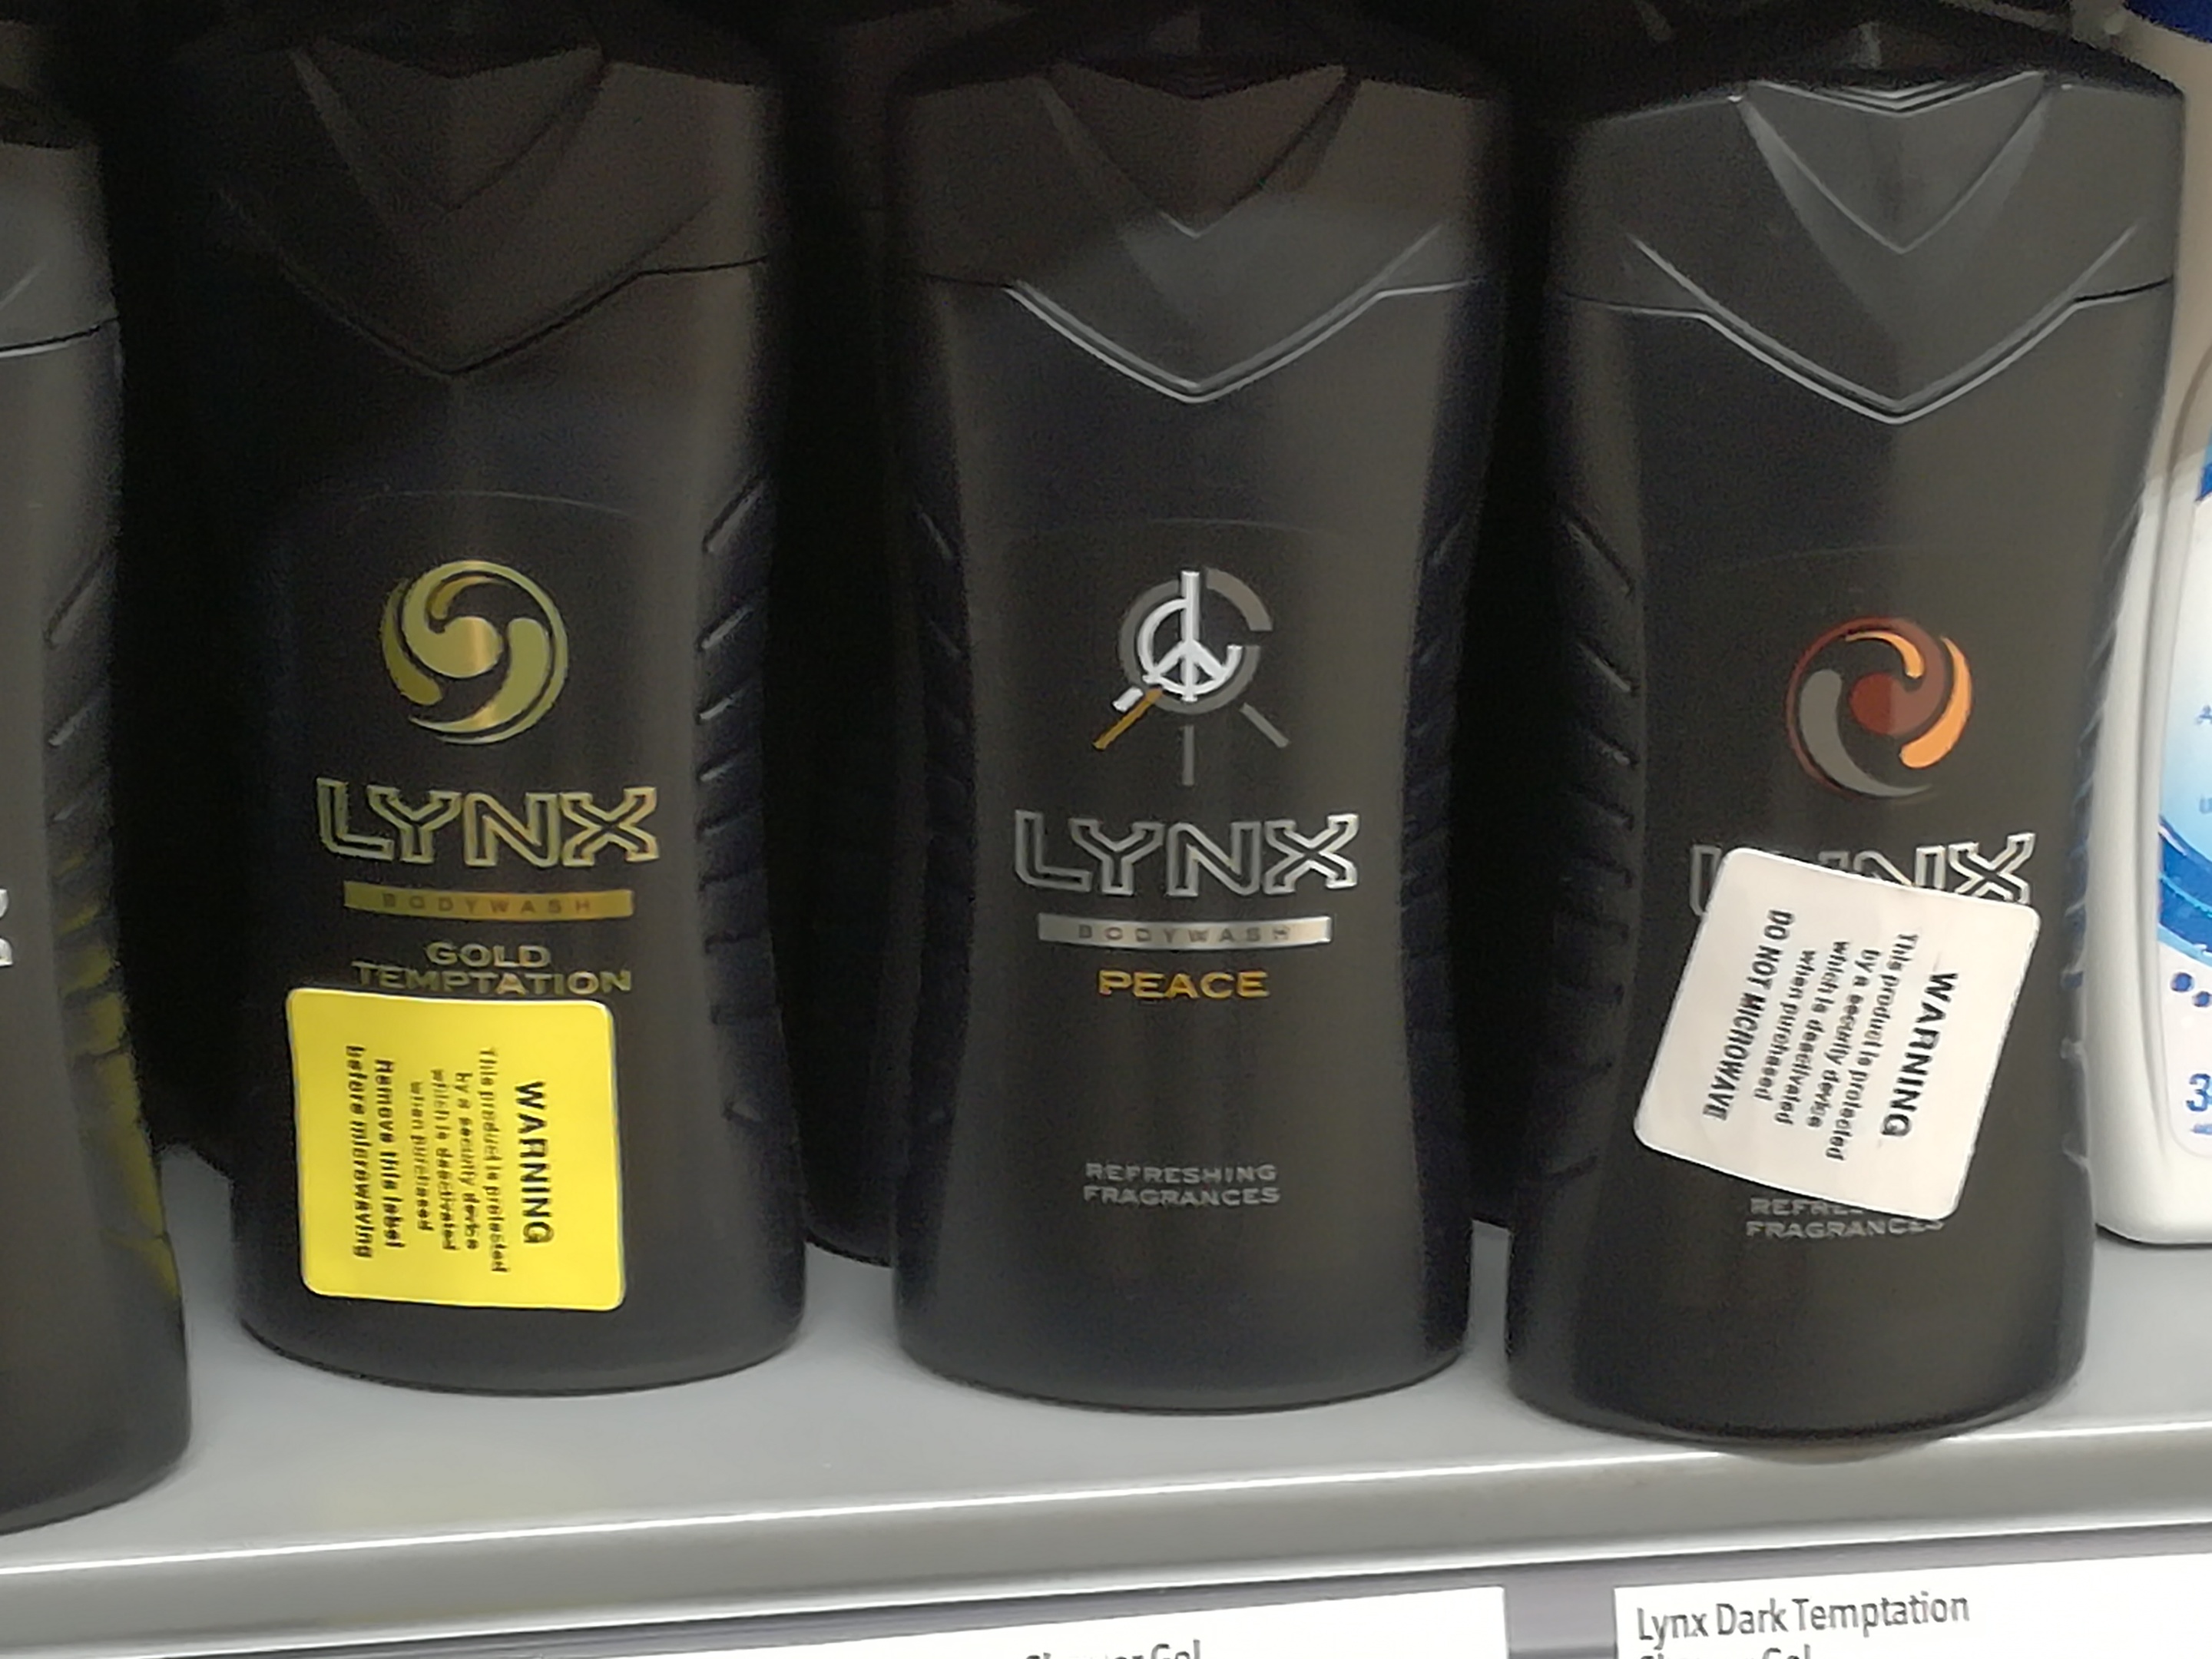 Security tags on shower gel.